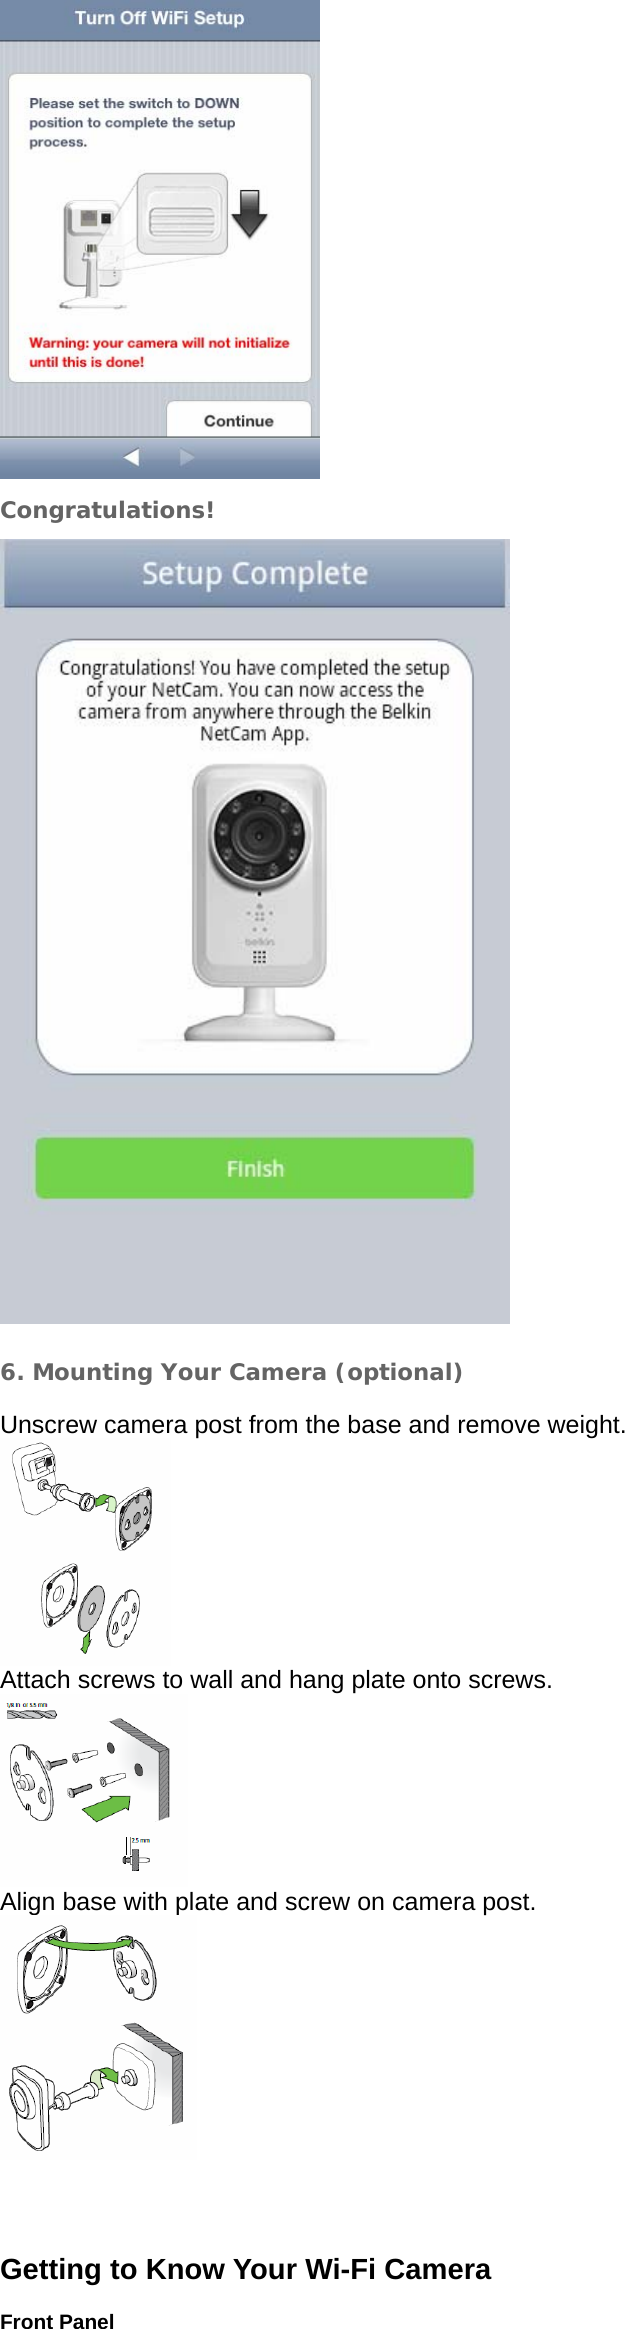   Congratulations!     6. Mounting Your Camera (optional) Unscrew camera post from the base and remove weight.  Attach screws to wall and hang plate onto screws.  Align base with plate and screw on camera post.       Getting to Know Your Wi-Fi Camera  Front Panel 